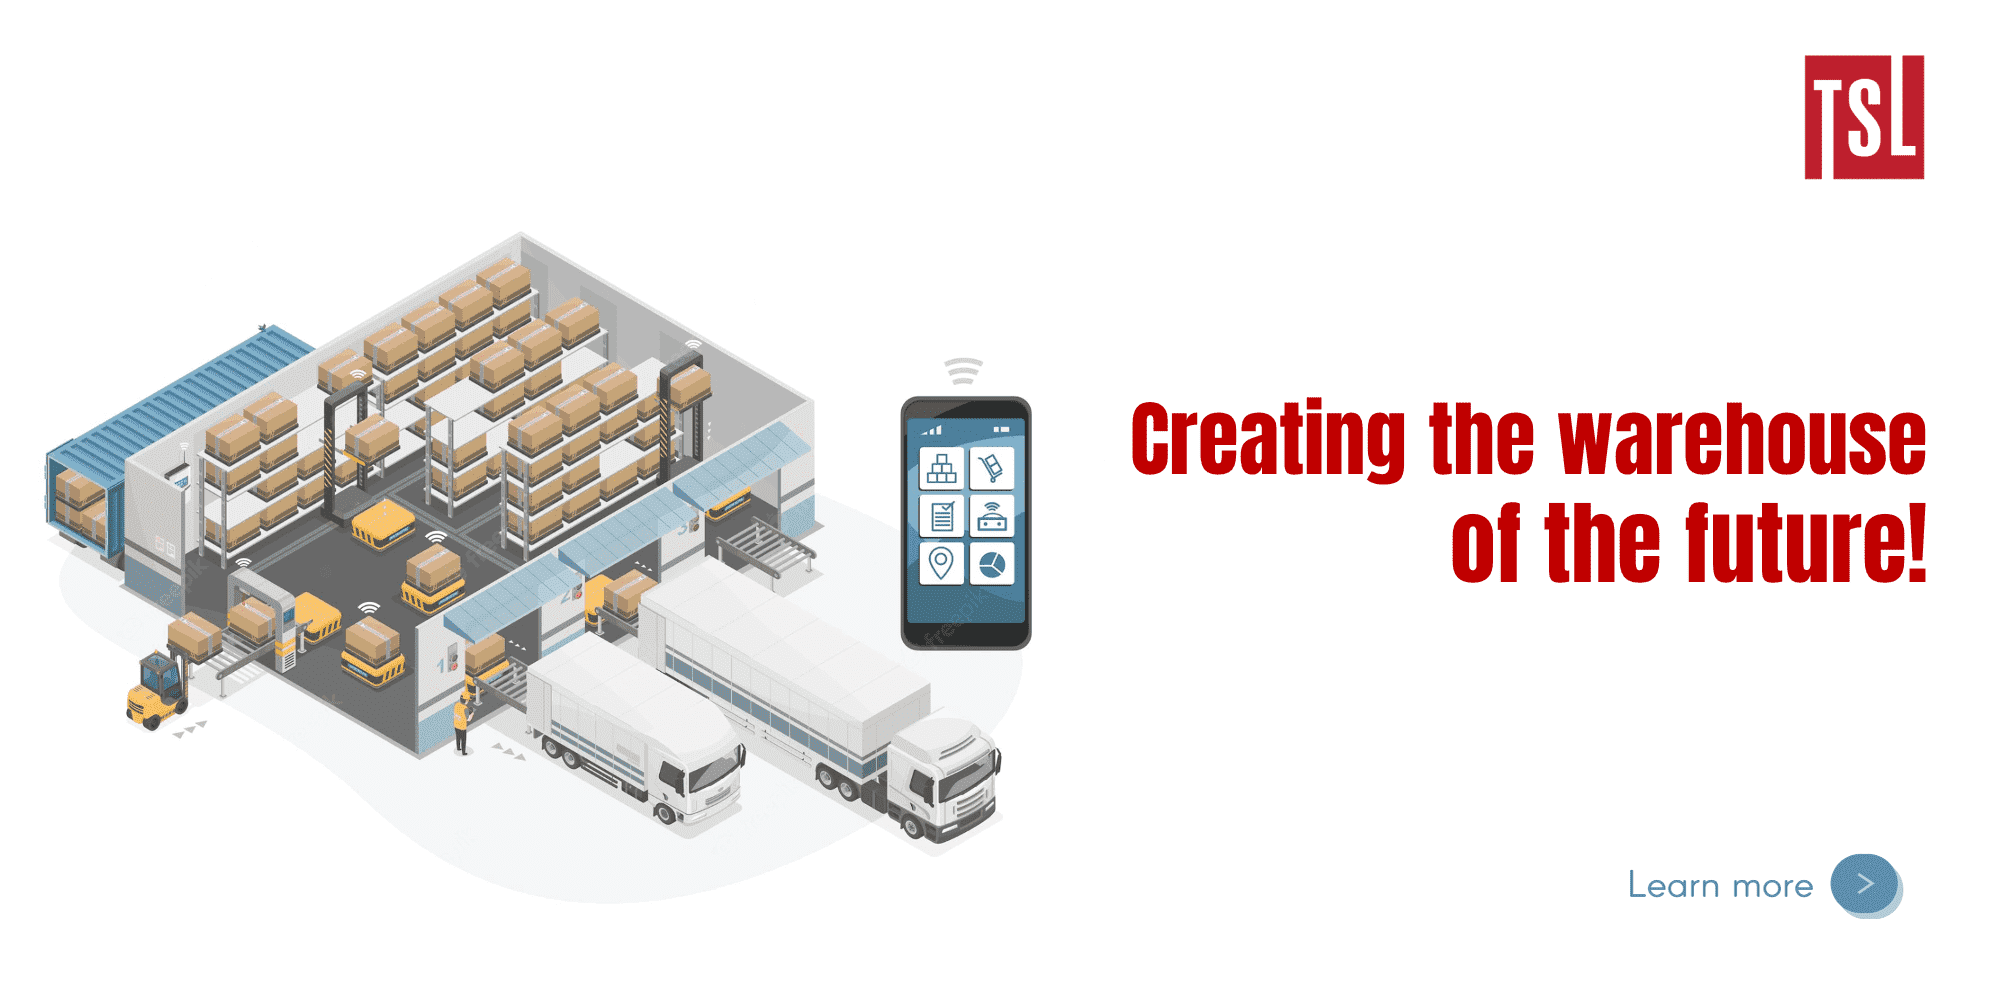 Creating the warehouse of the future!